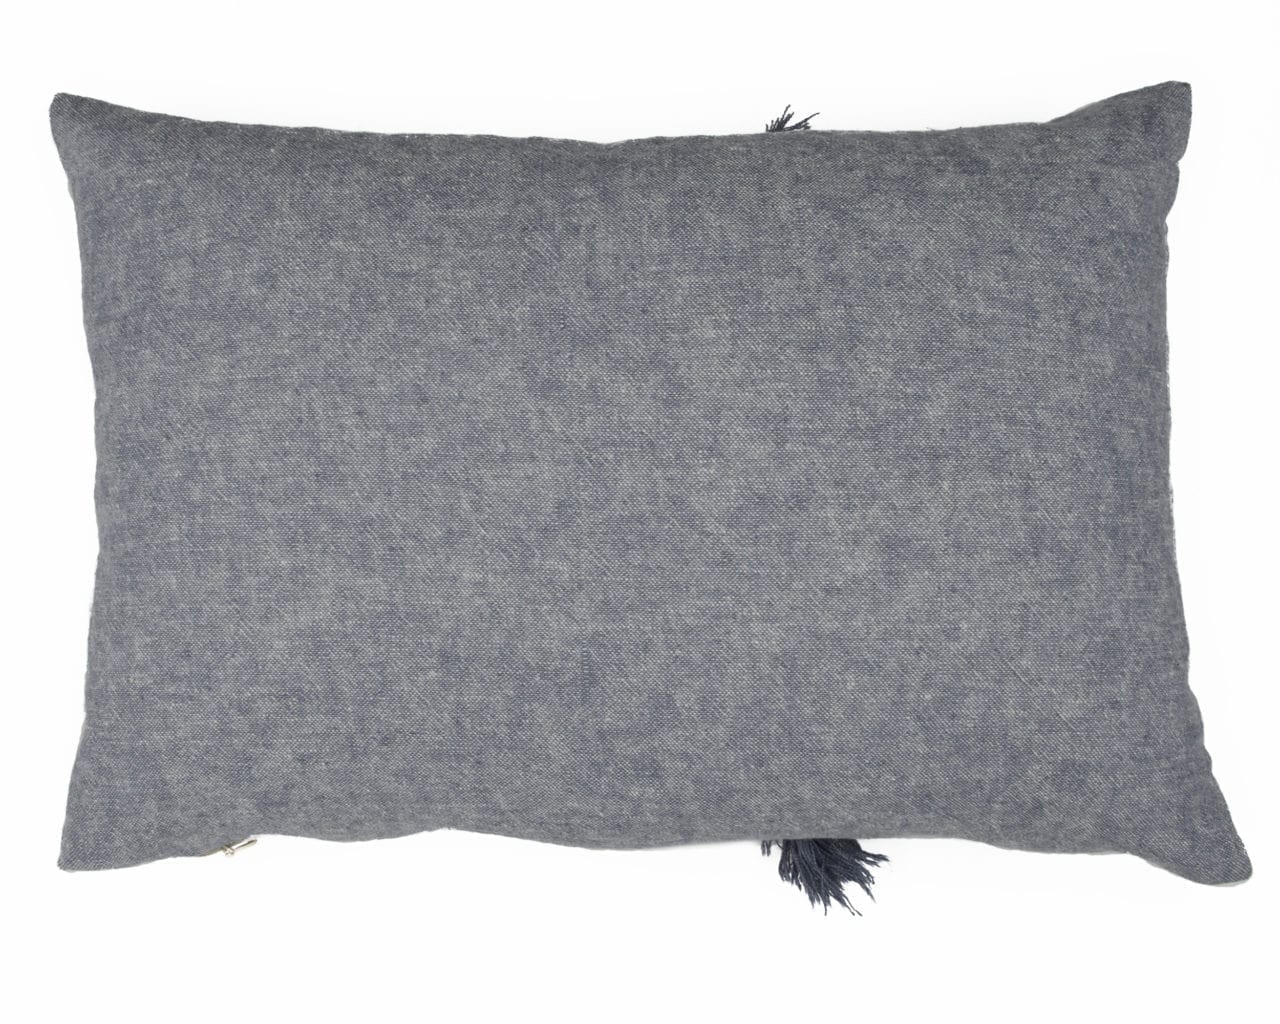 Bilbao Rectangle Cushion in Linen Union in Old Violet + Old White and Old White + French Linen